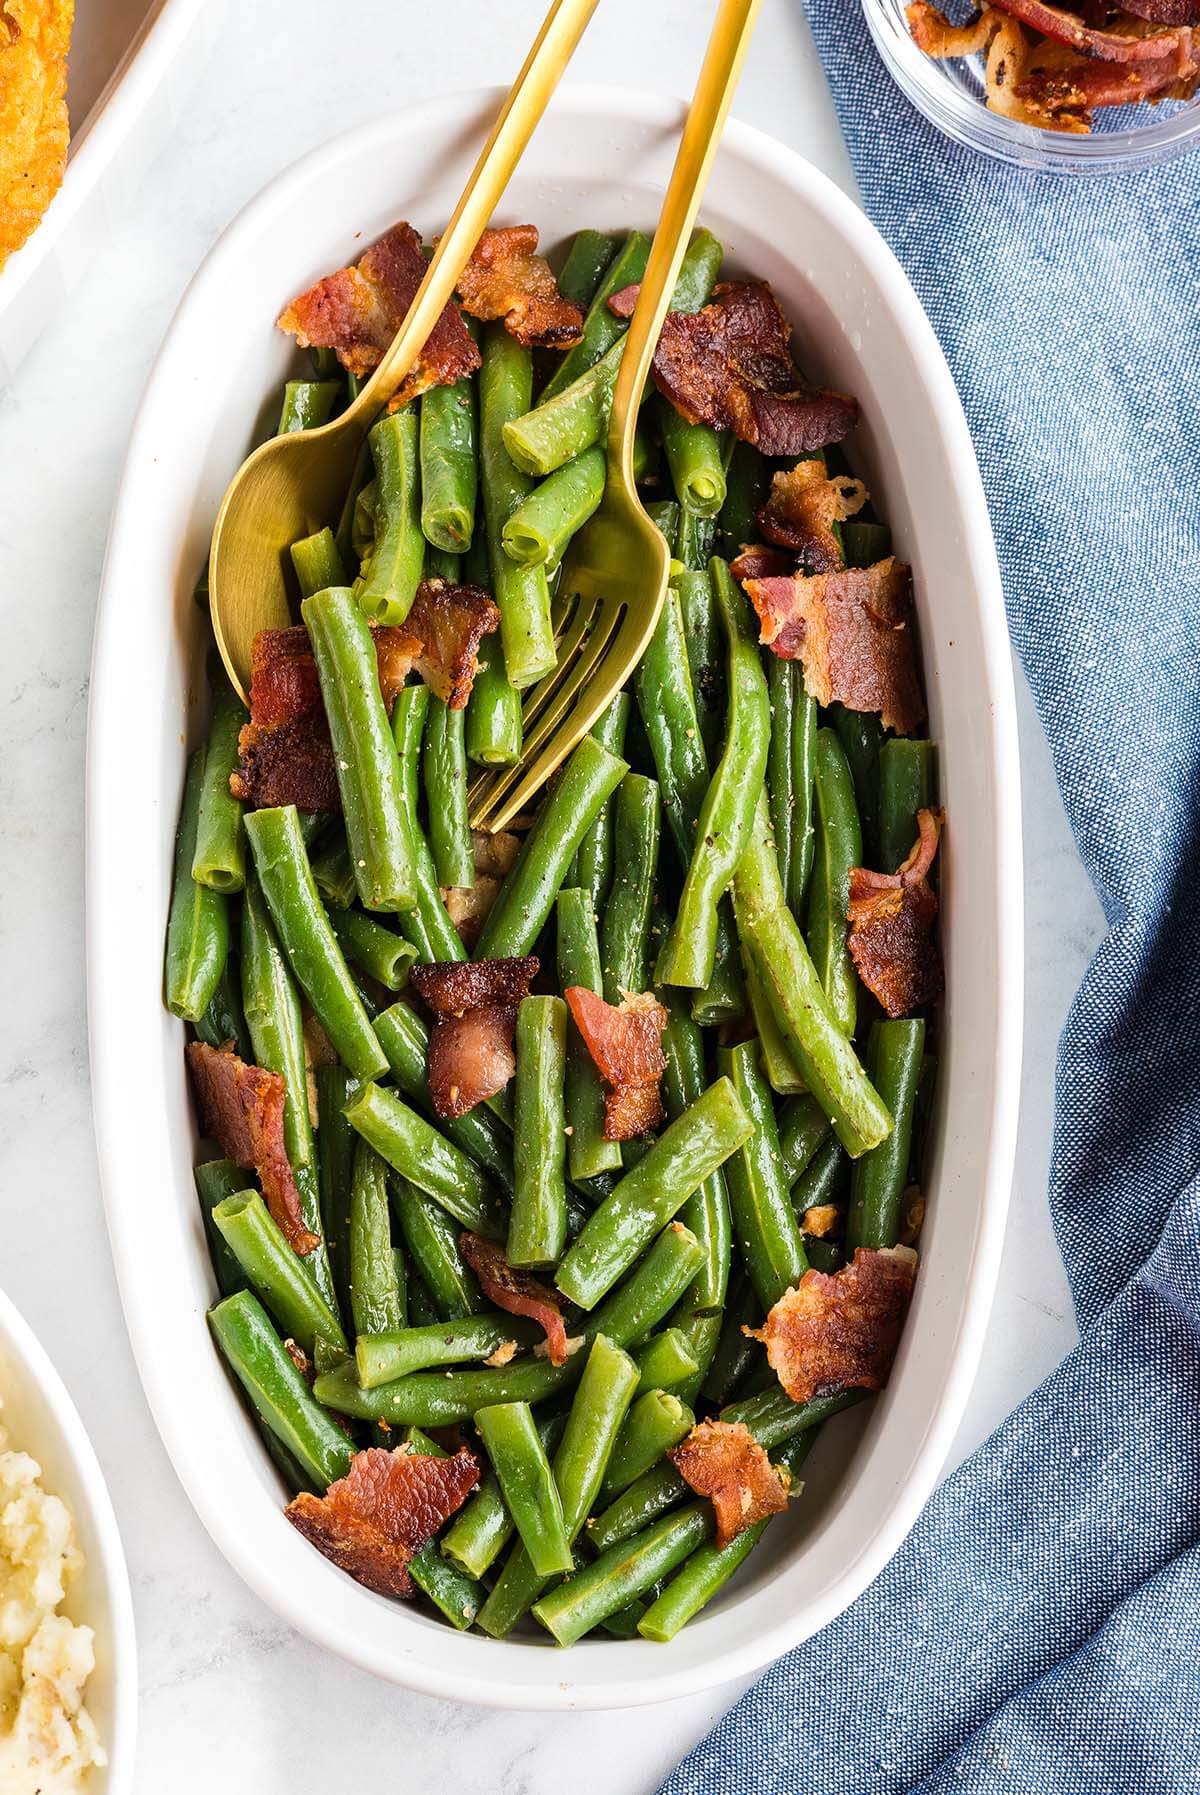 A dish of cooked green beans topped with bacon pieces, served with chopsticks.